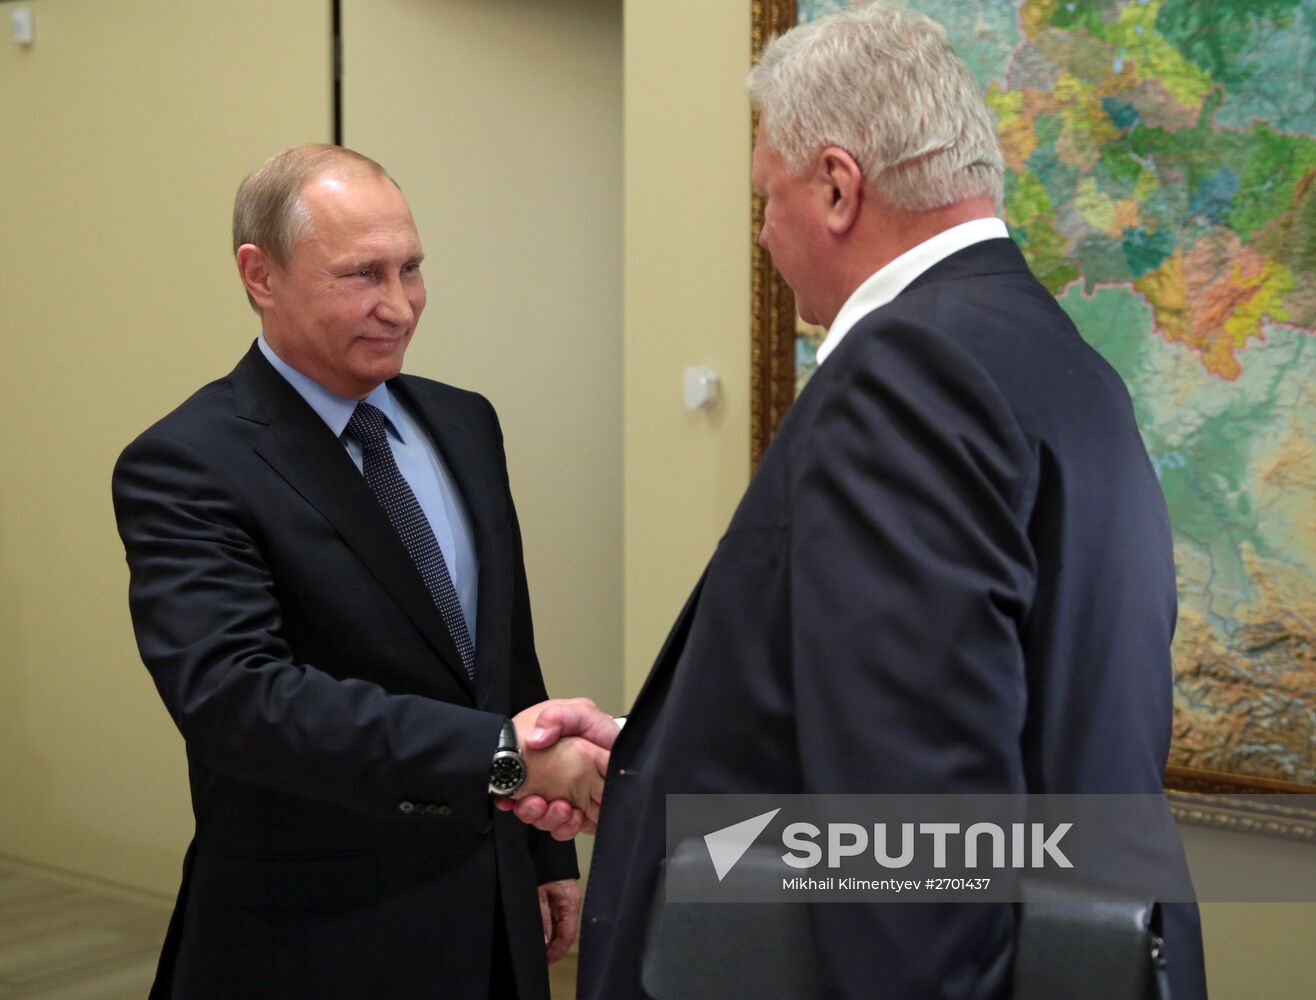 President Vladimir Putin meets with Mikhail Shmakov, Chairman of the Federation of Independent Unions